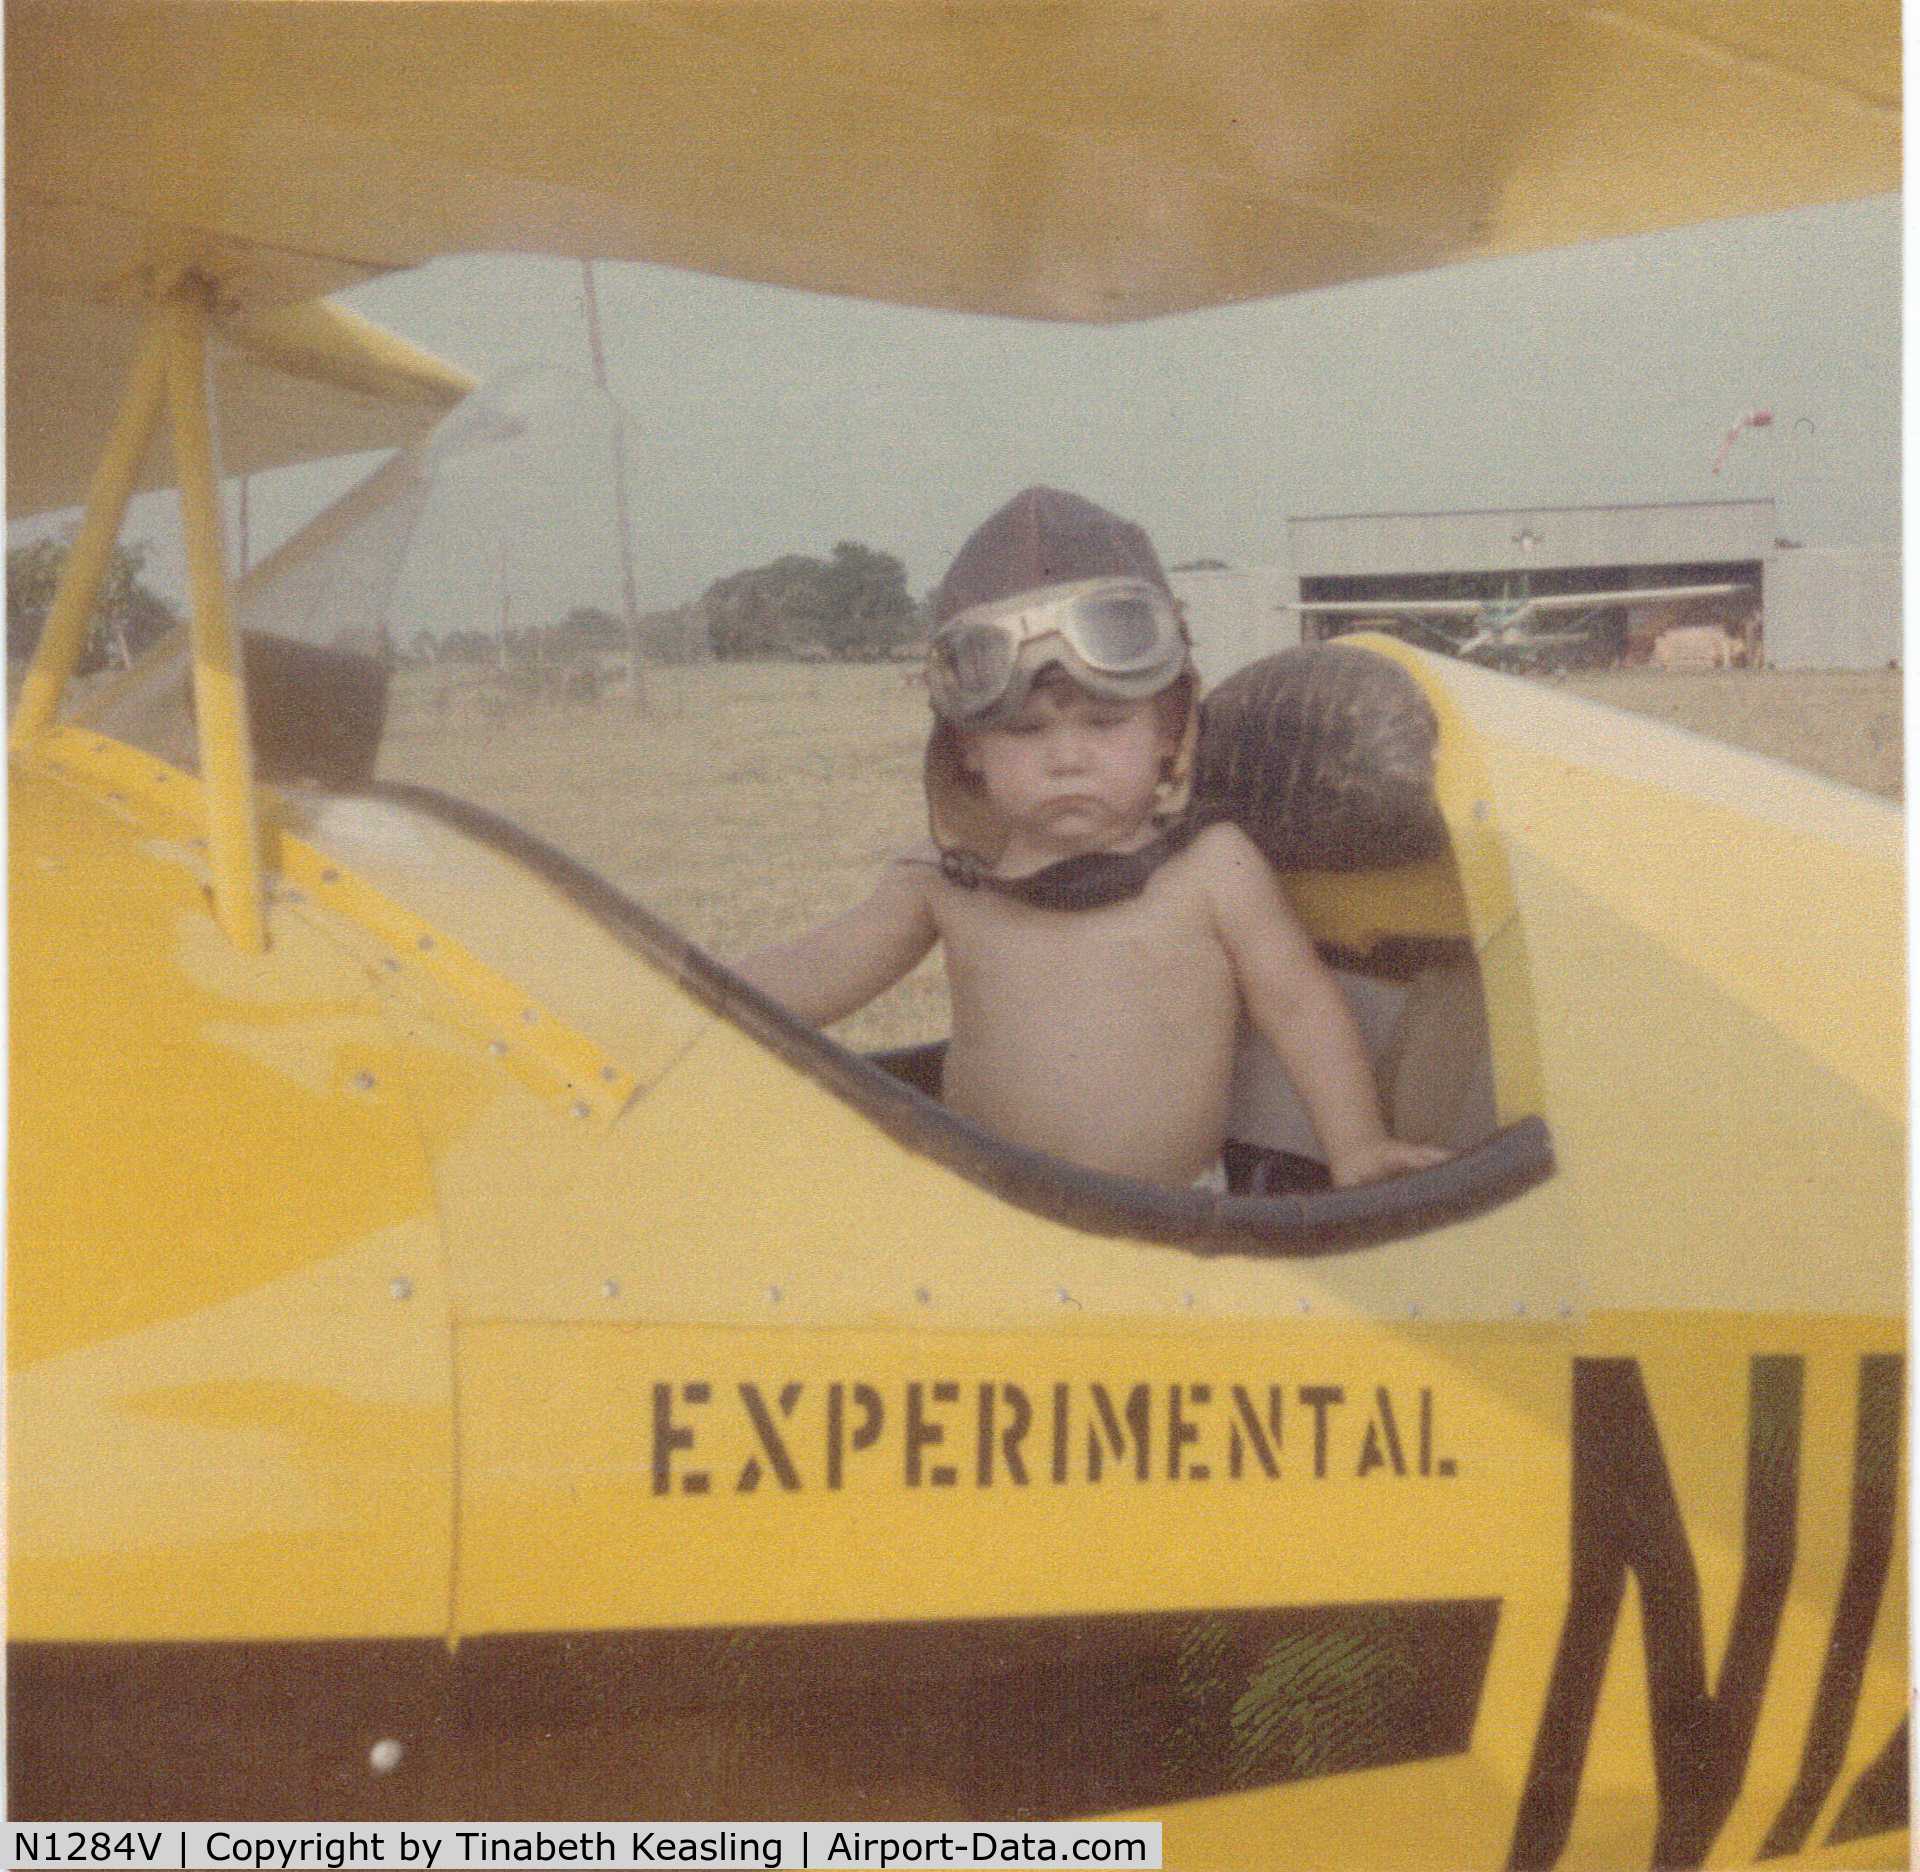 N1284V, Mong Sport PSA-1 C/N 100, Jimmy Brown is in the Mong PSA-1 (N1284V) in 1970 at Fairview Field, Richards, Texas.  Photo, taken by his mom, is now featured on the back cover of his newly published book, Texas Greed.